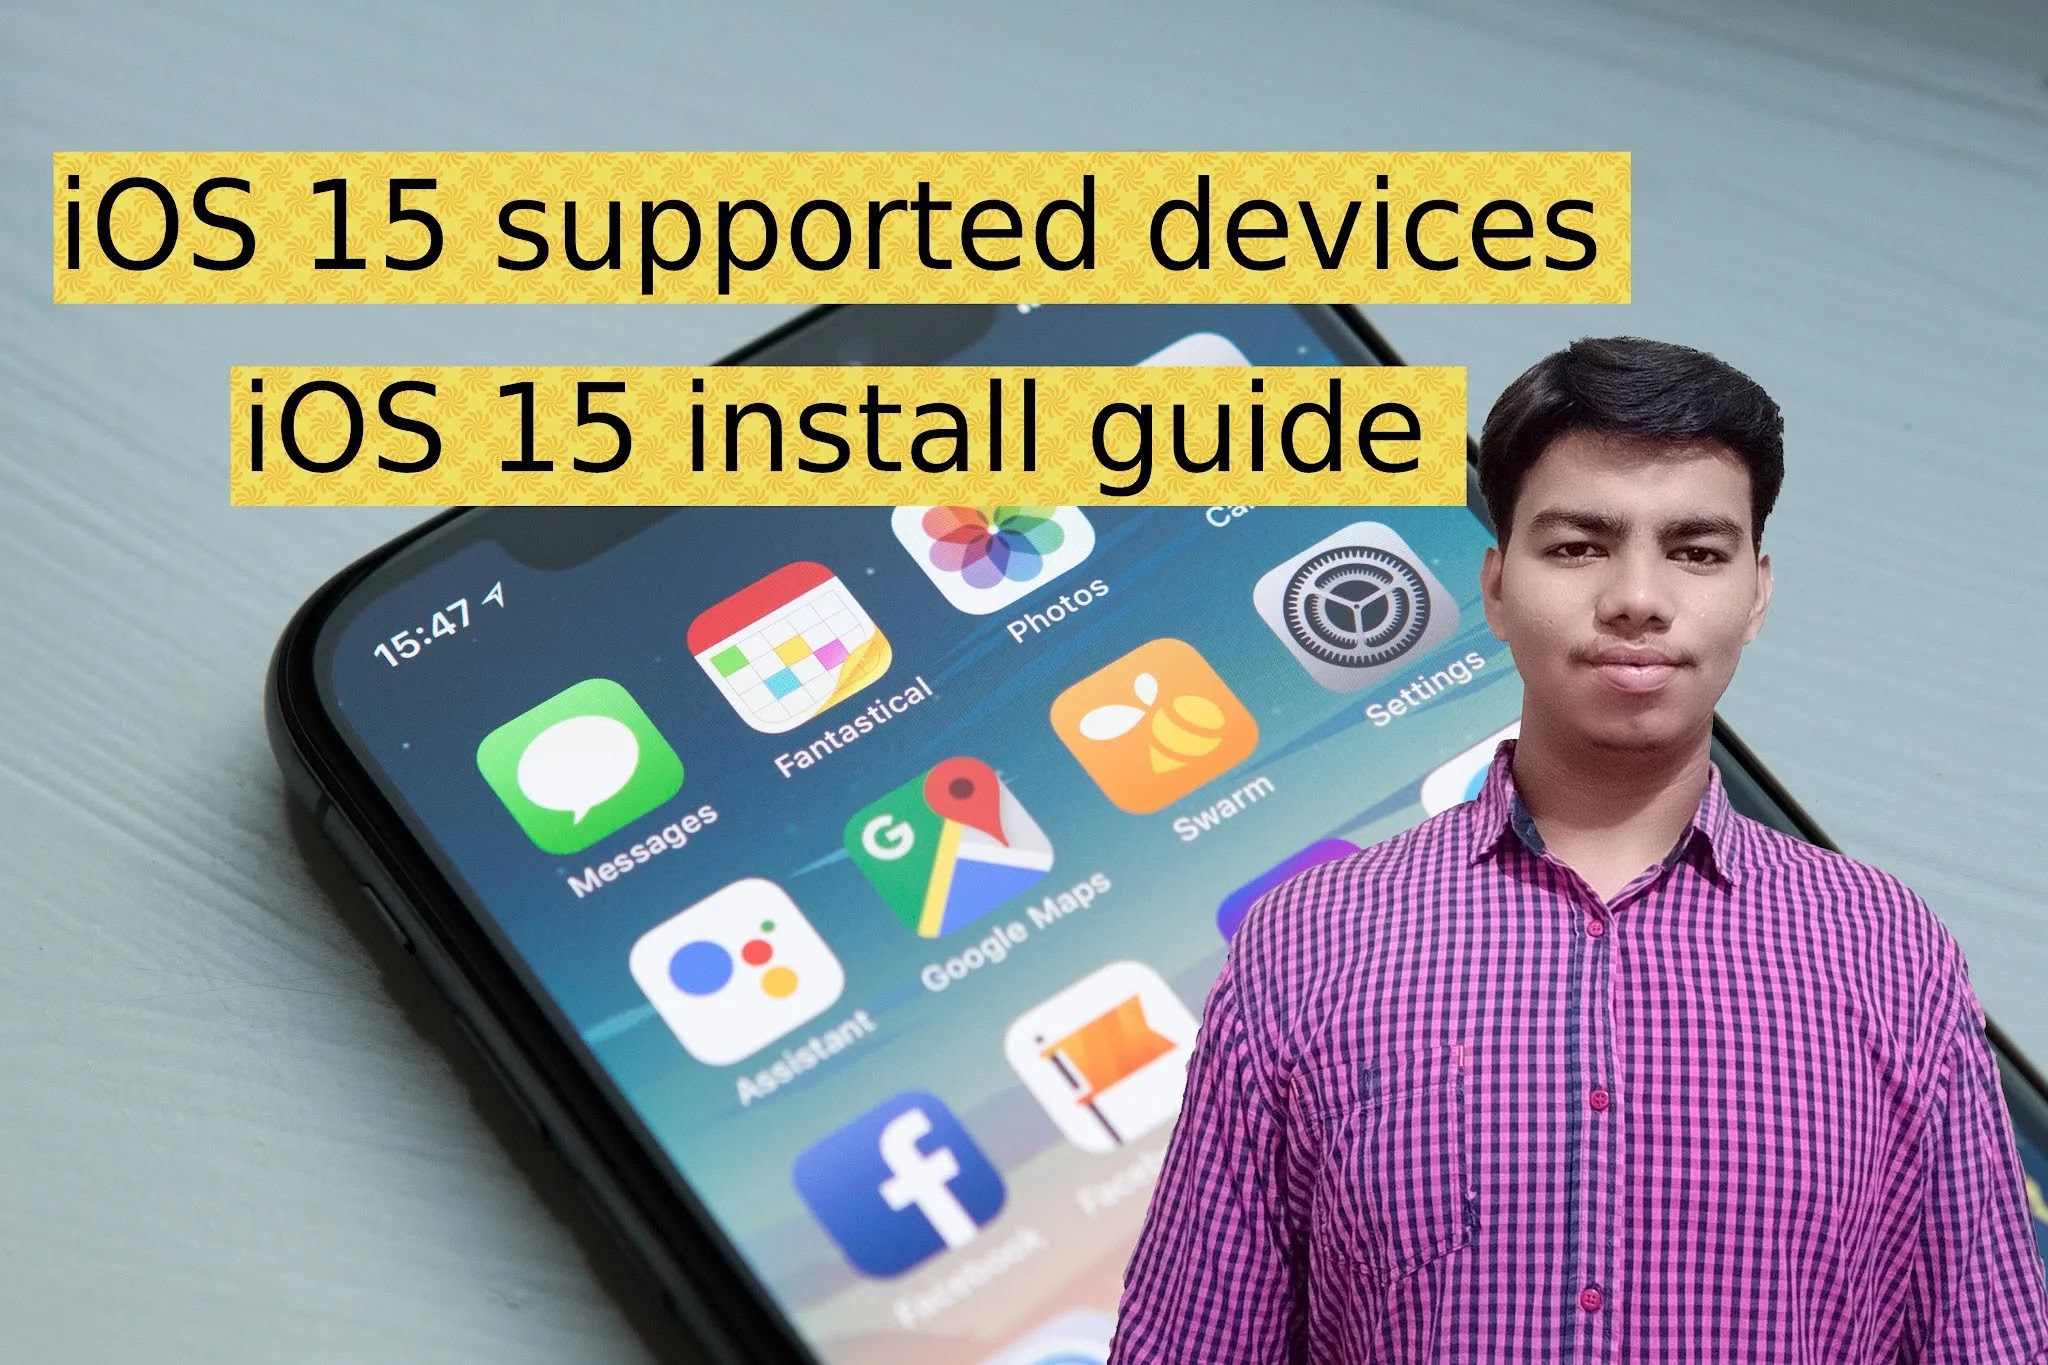 iOS 15 supported devices